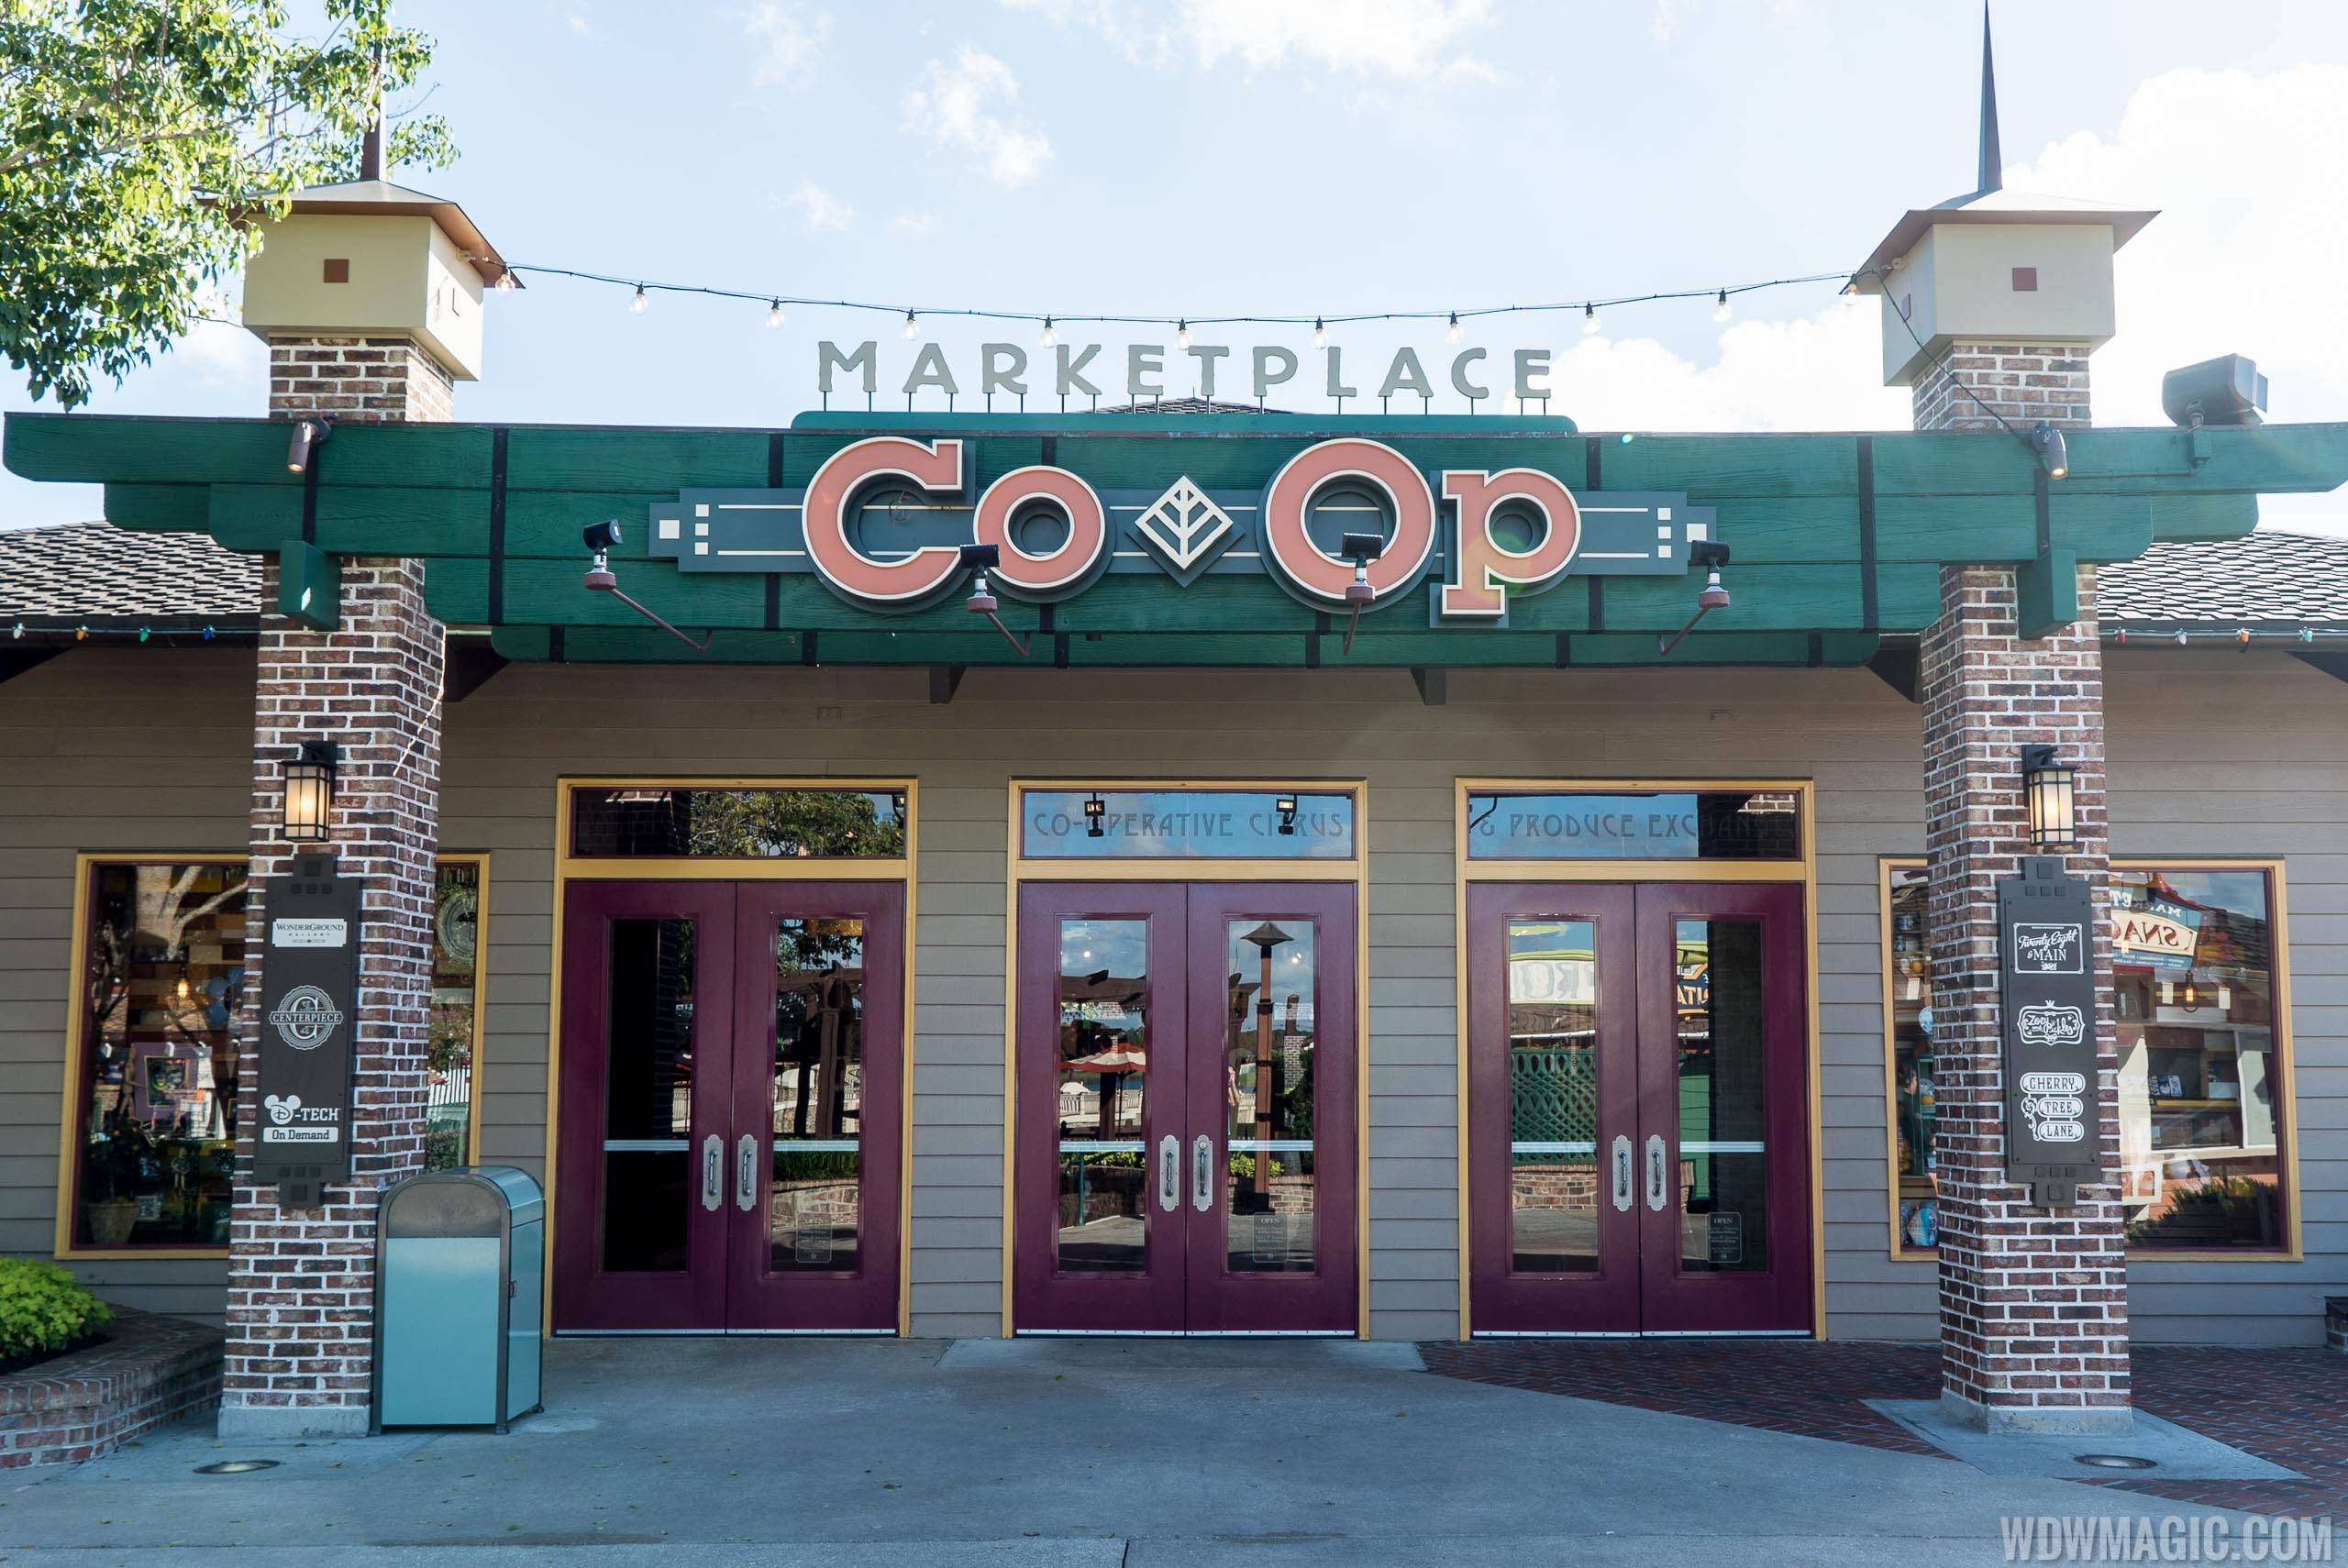 New Marketplace Co Op concept store coming to Downtown Disney